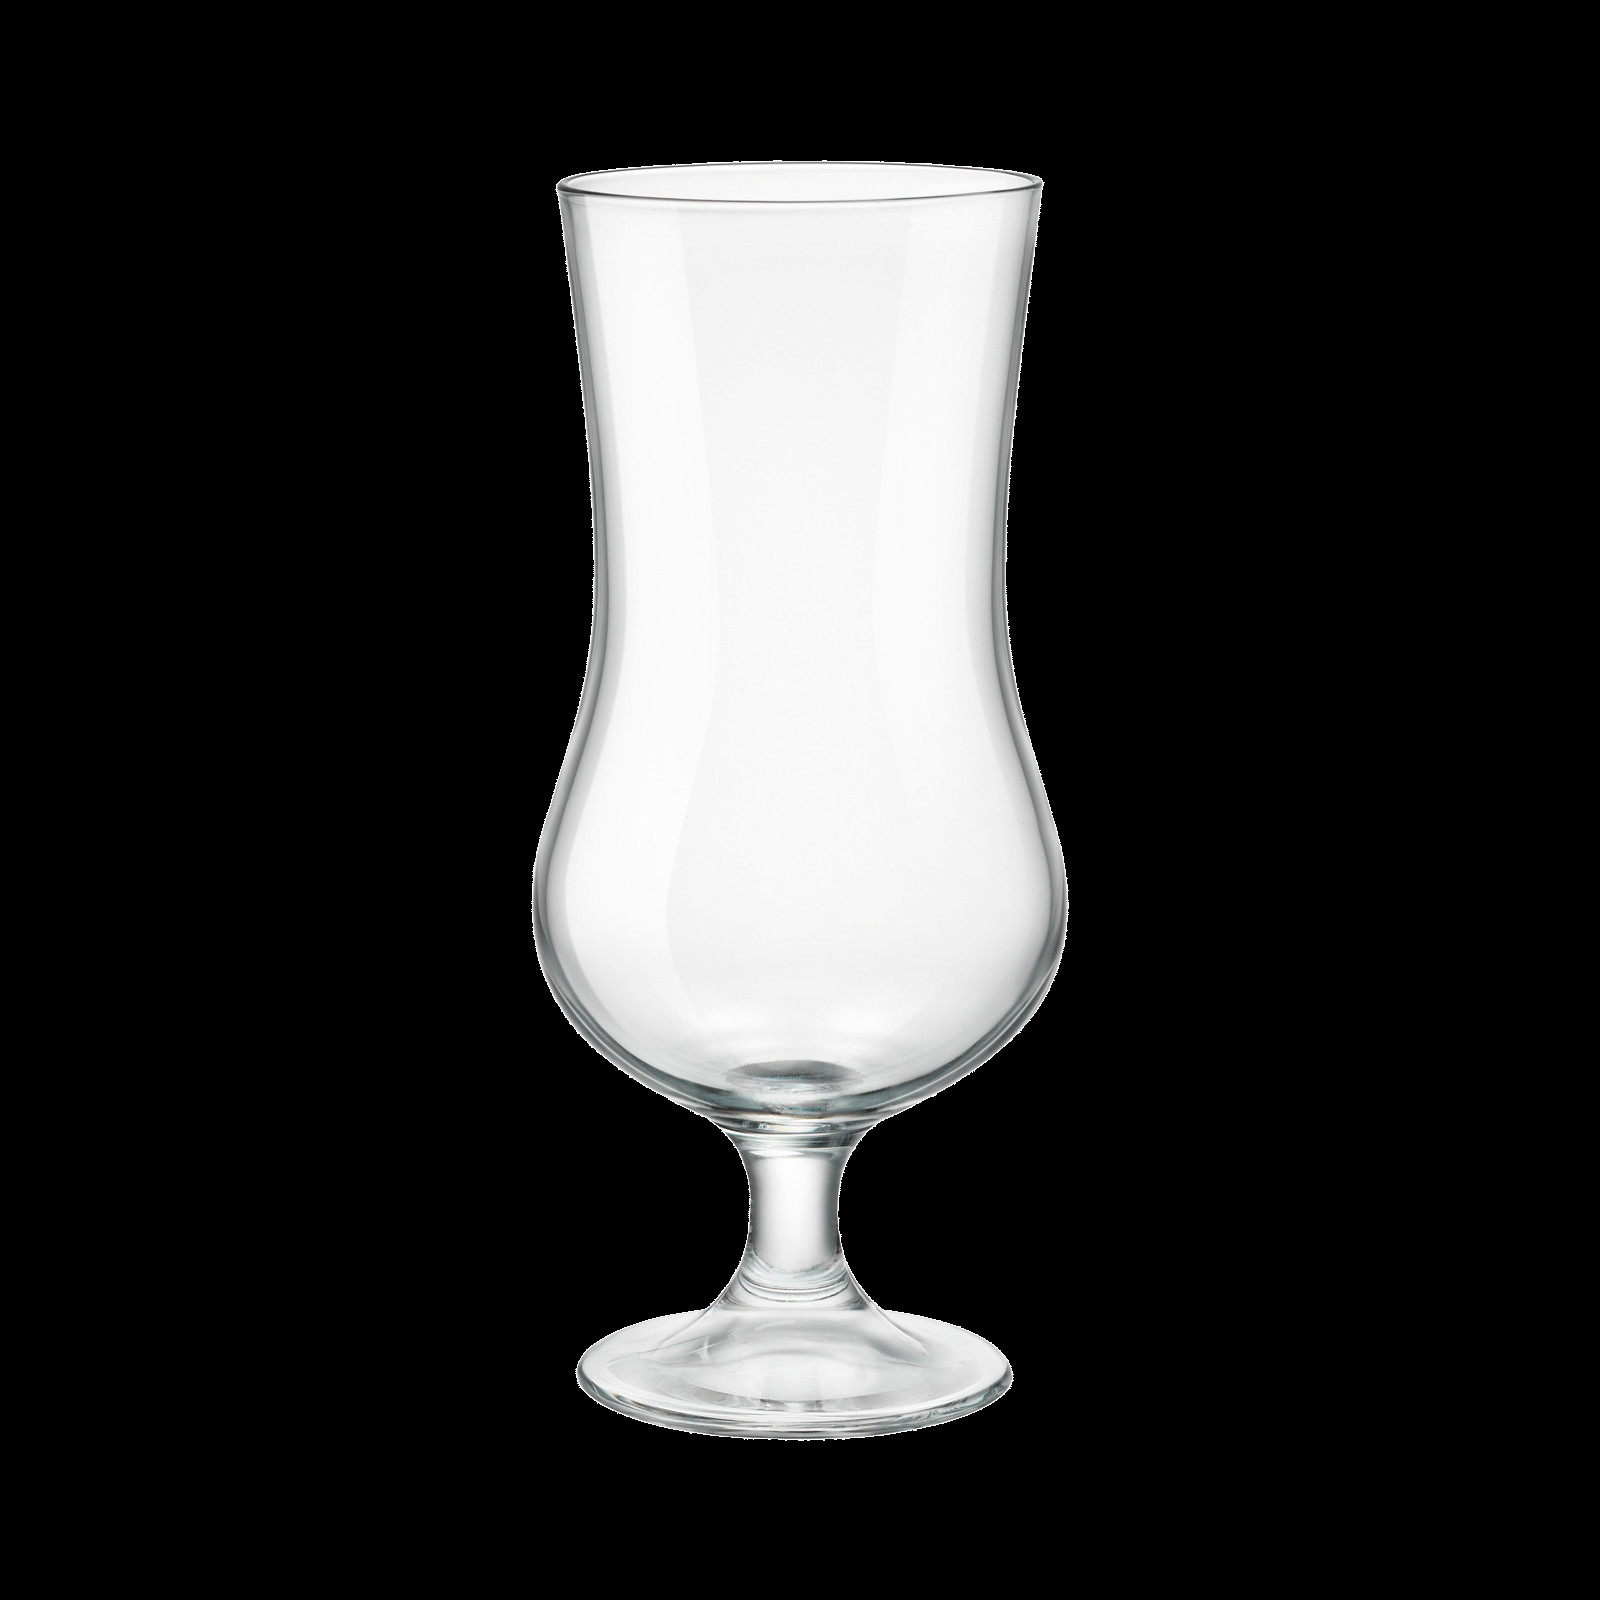 20 Unique Large Clear Glass Vases Cheap 2024 free download large clear glass vases cheap of archivi products bormioli rocco throughout large beer glass